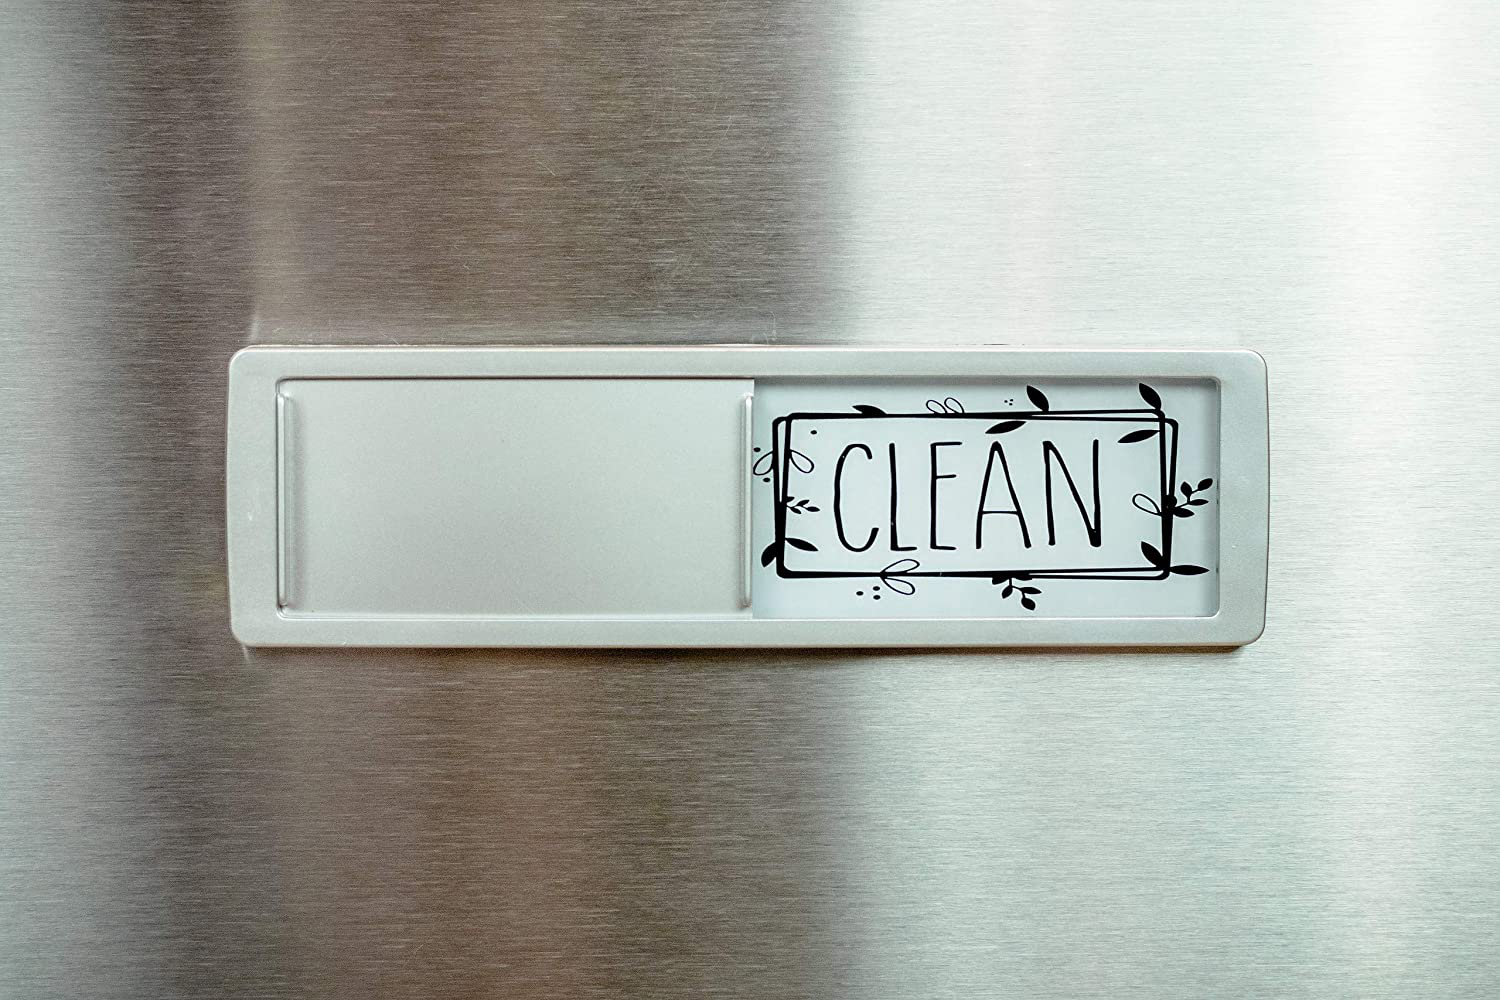 Babypop! Newest Design Dishwasher Magnet Clean Dirty Sign Indicator, Trendy Universal Kitchen Dish Washer Refrigerator Magnet, Super Strong Magnet with Stickers for Kitchen Organization and Storage